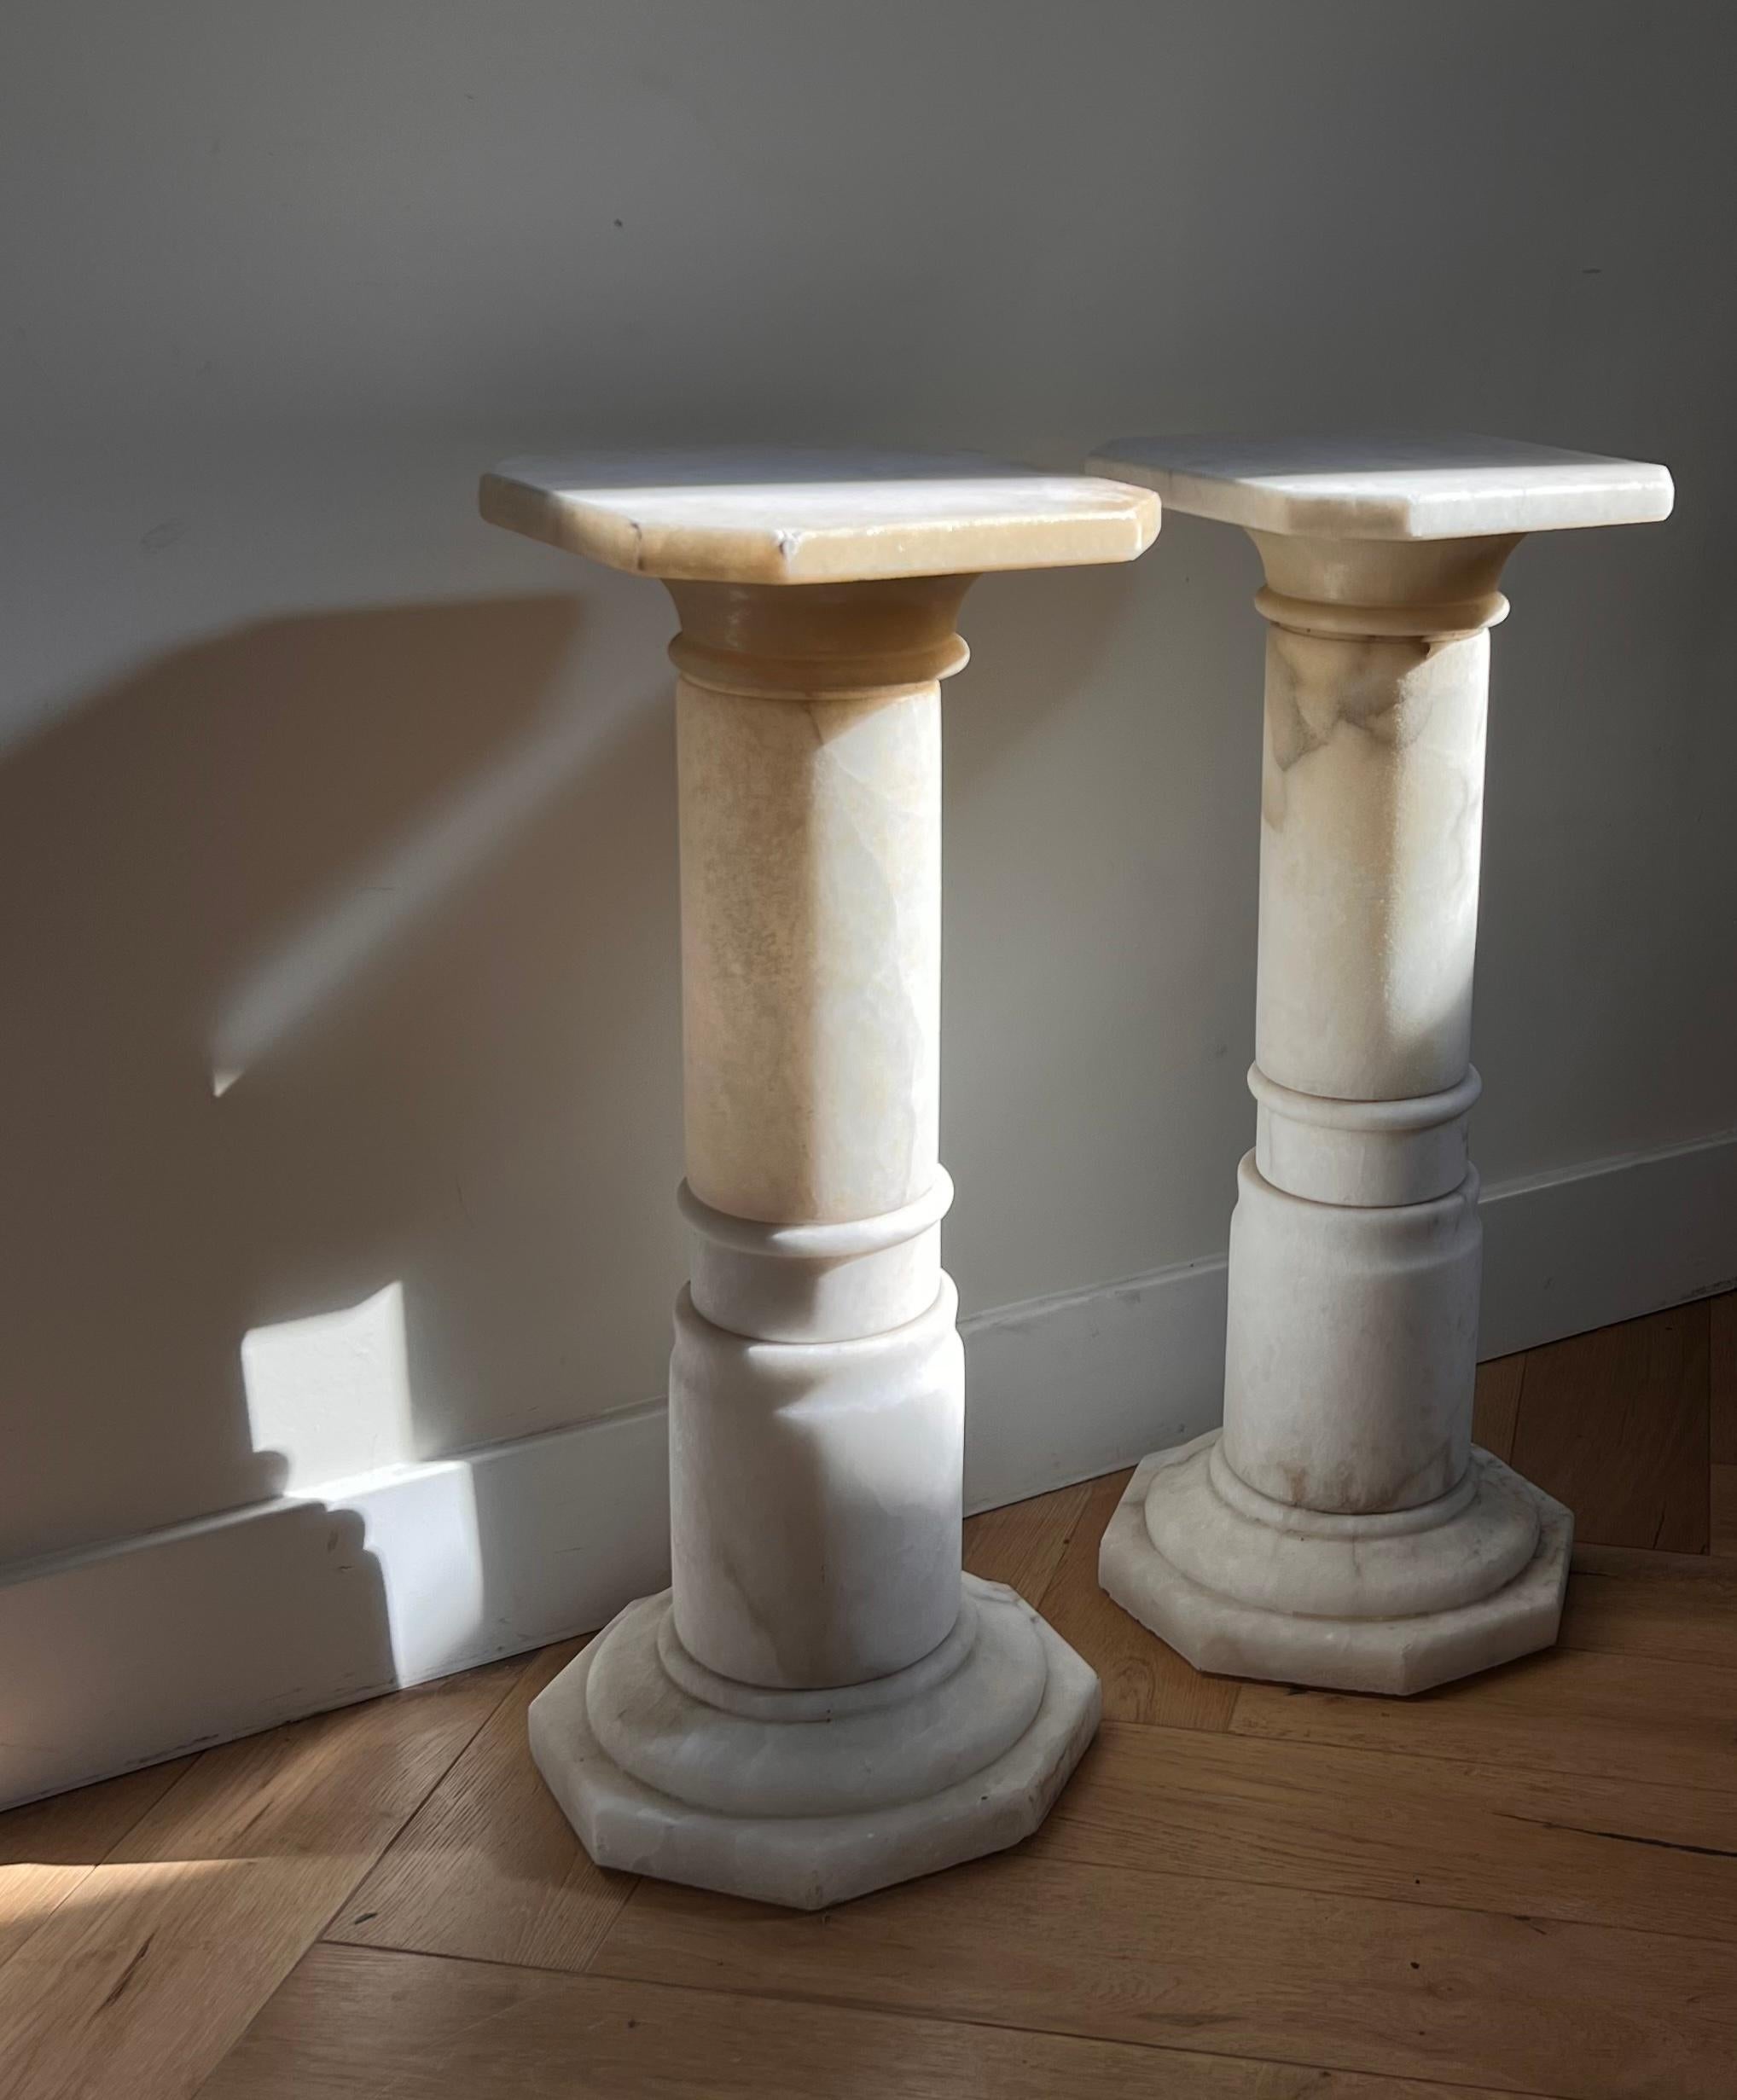 A pair of neoclassical alabaster pedestals, circa early 1960s. Cream with ash veining, they glow every so slightly translucent when the light is right. A loss on one edge and some stubborn epoxy of yore, otherwise good condition. Pick up in central